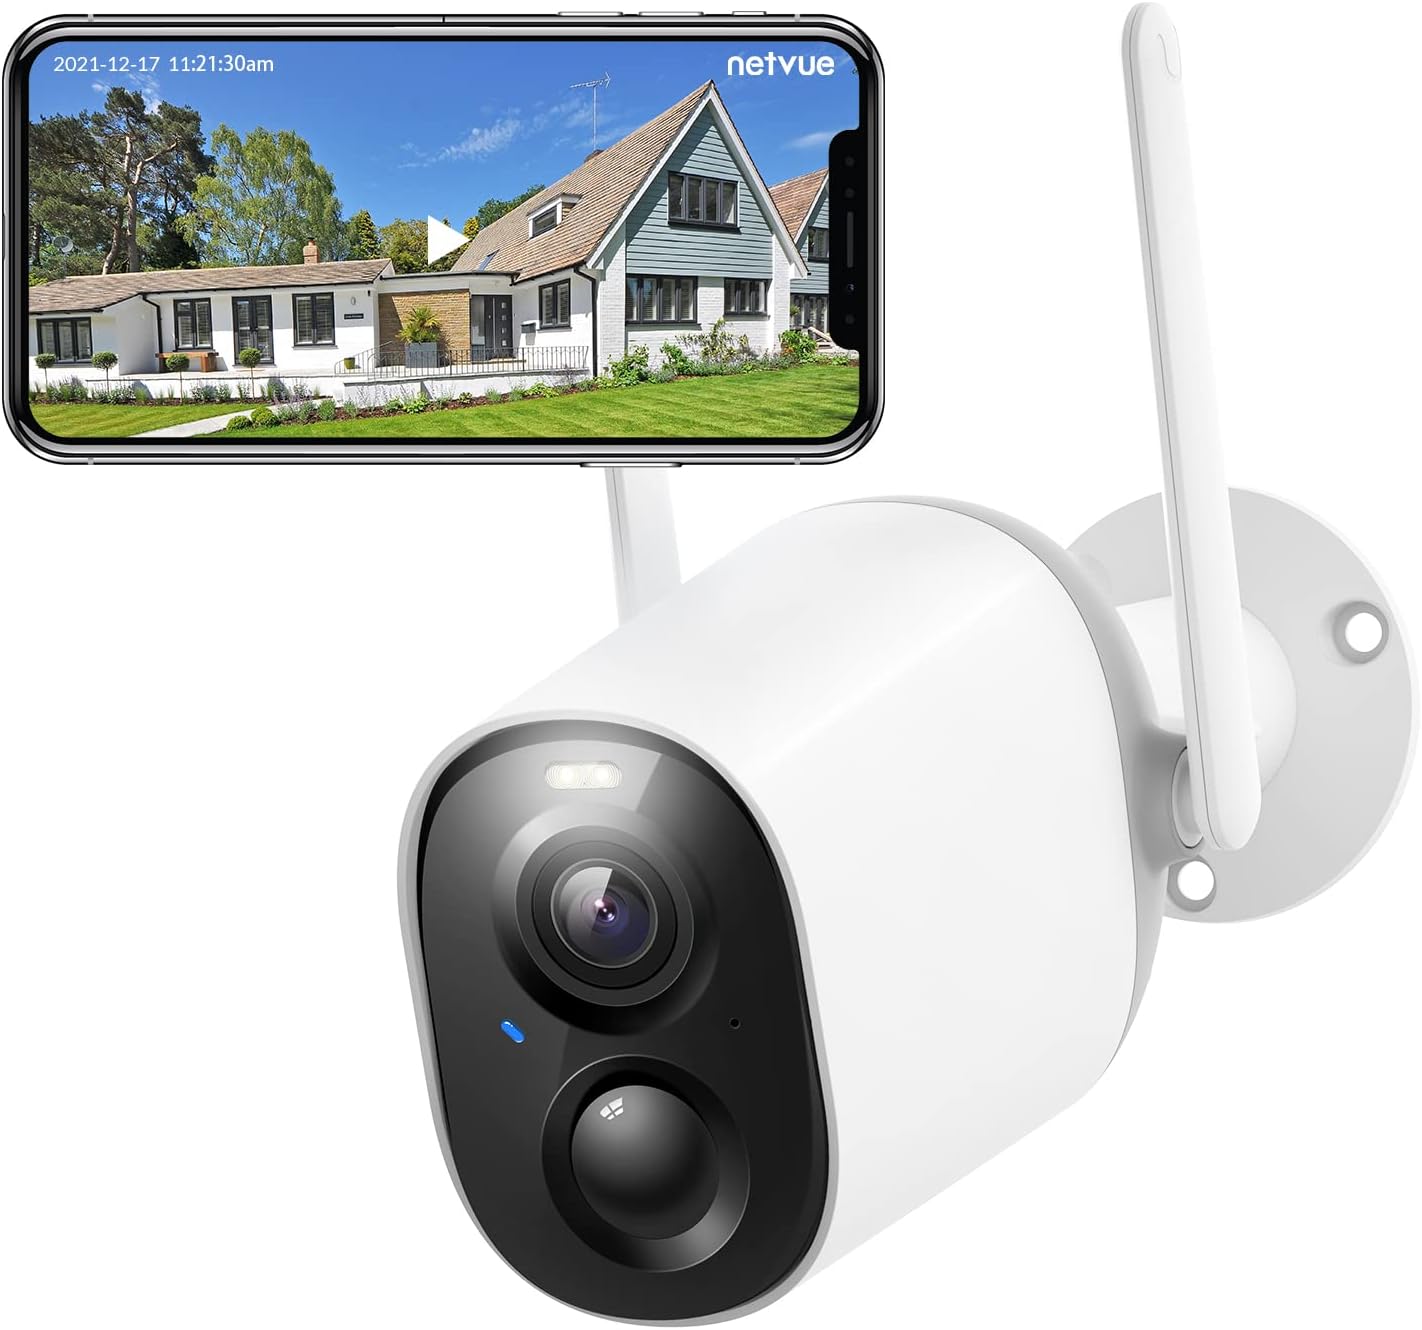 Top 4 Rechargeable Security Camera Review - 360outdoorcamera.com